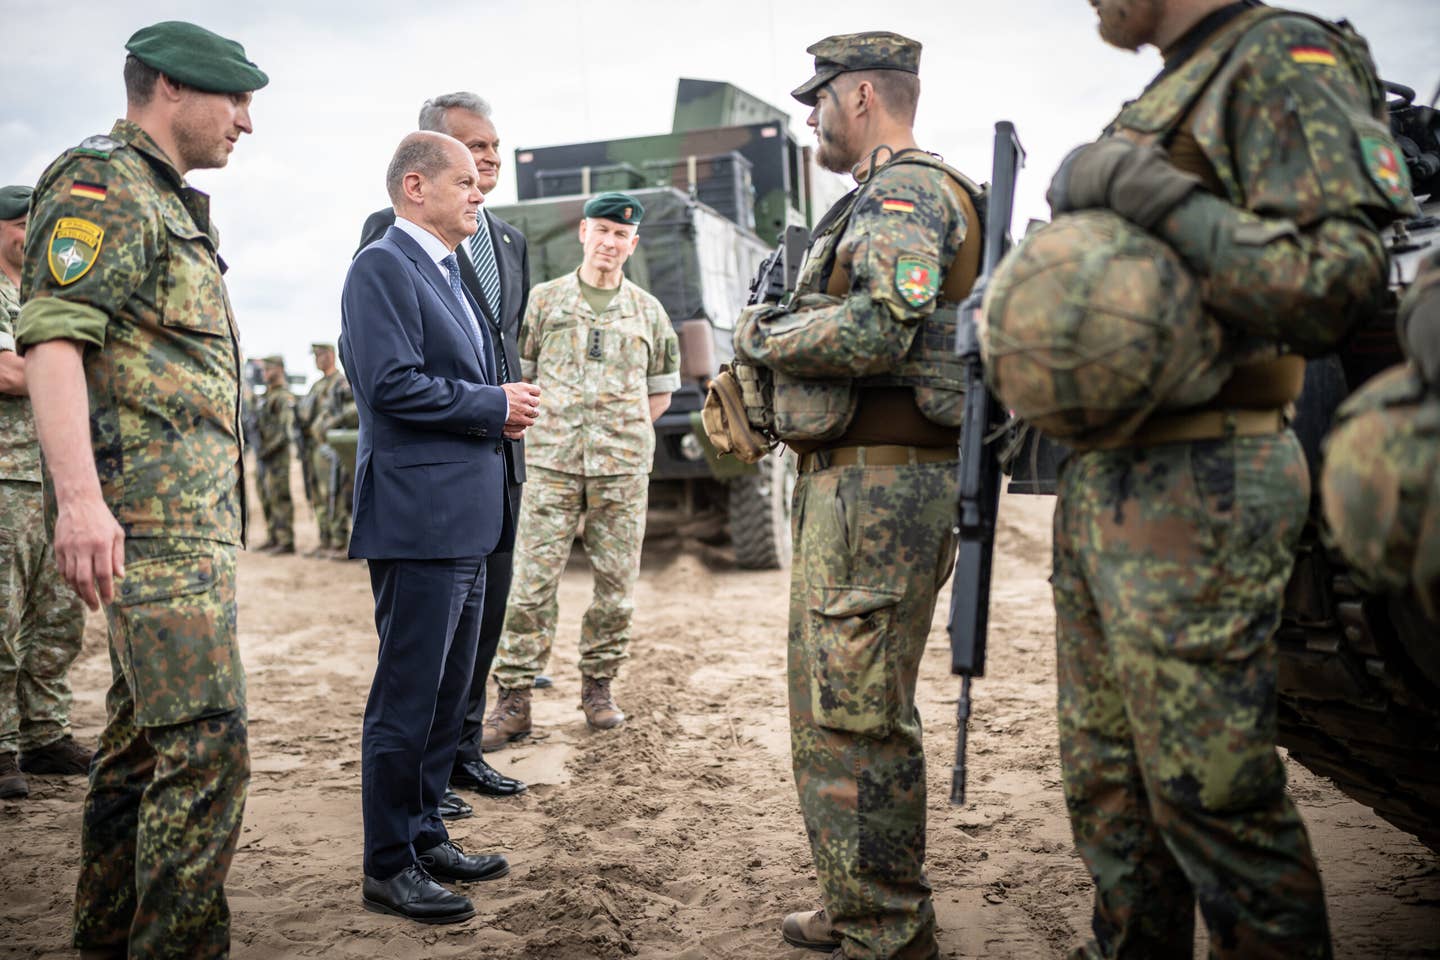 German Chancellor Olaf Scholz visits the NATO Enhanced Forward Presence Battle Group in Lithuania, where more than 1,000 German soldiers are stationed as part of military support to the Baltics to defend against a possible Russian attack. <em>Photo by Michael Kappeler/picture alliance via Getty Images</em>